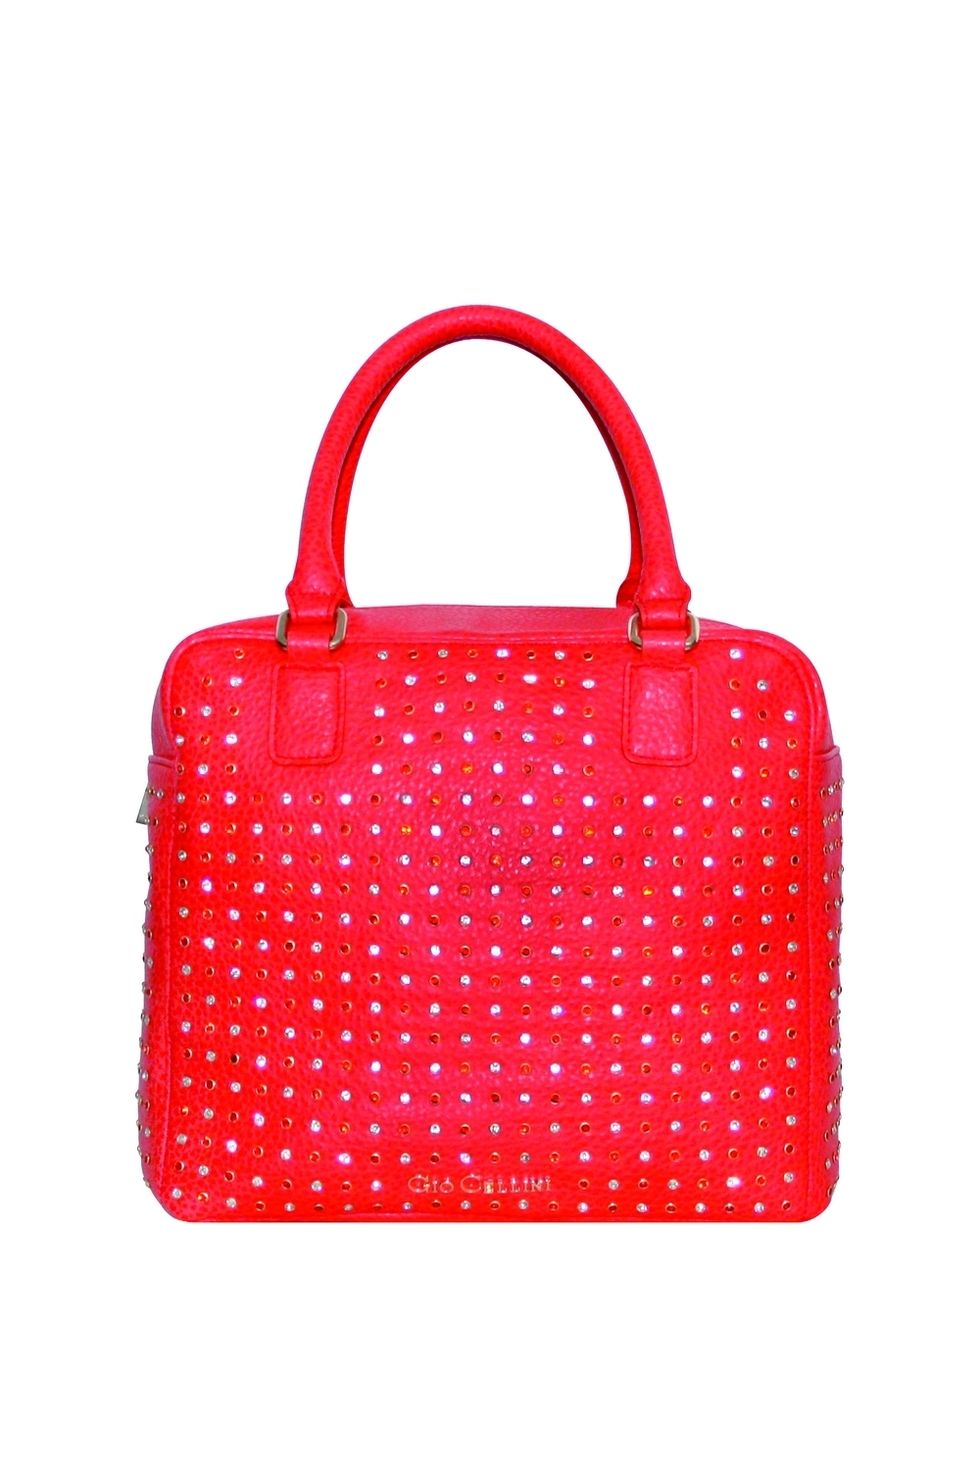 Product, Bag, Red, Pattern, White, Style, Fashion accessory, Luggage and bags, Shoulder bag, Fashion, 